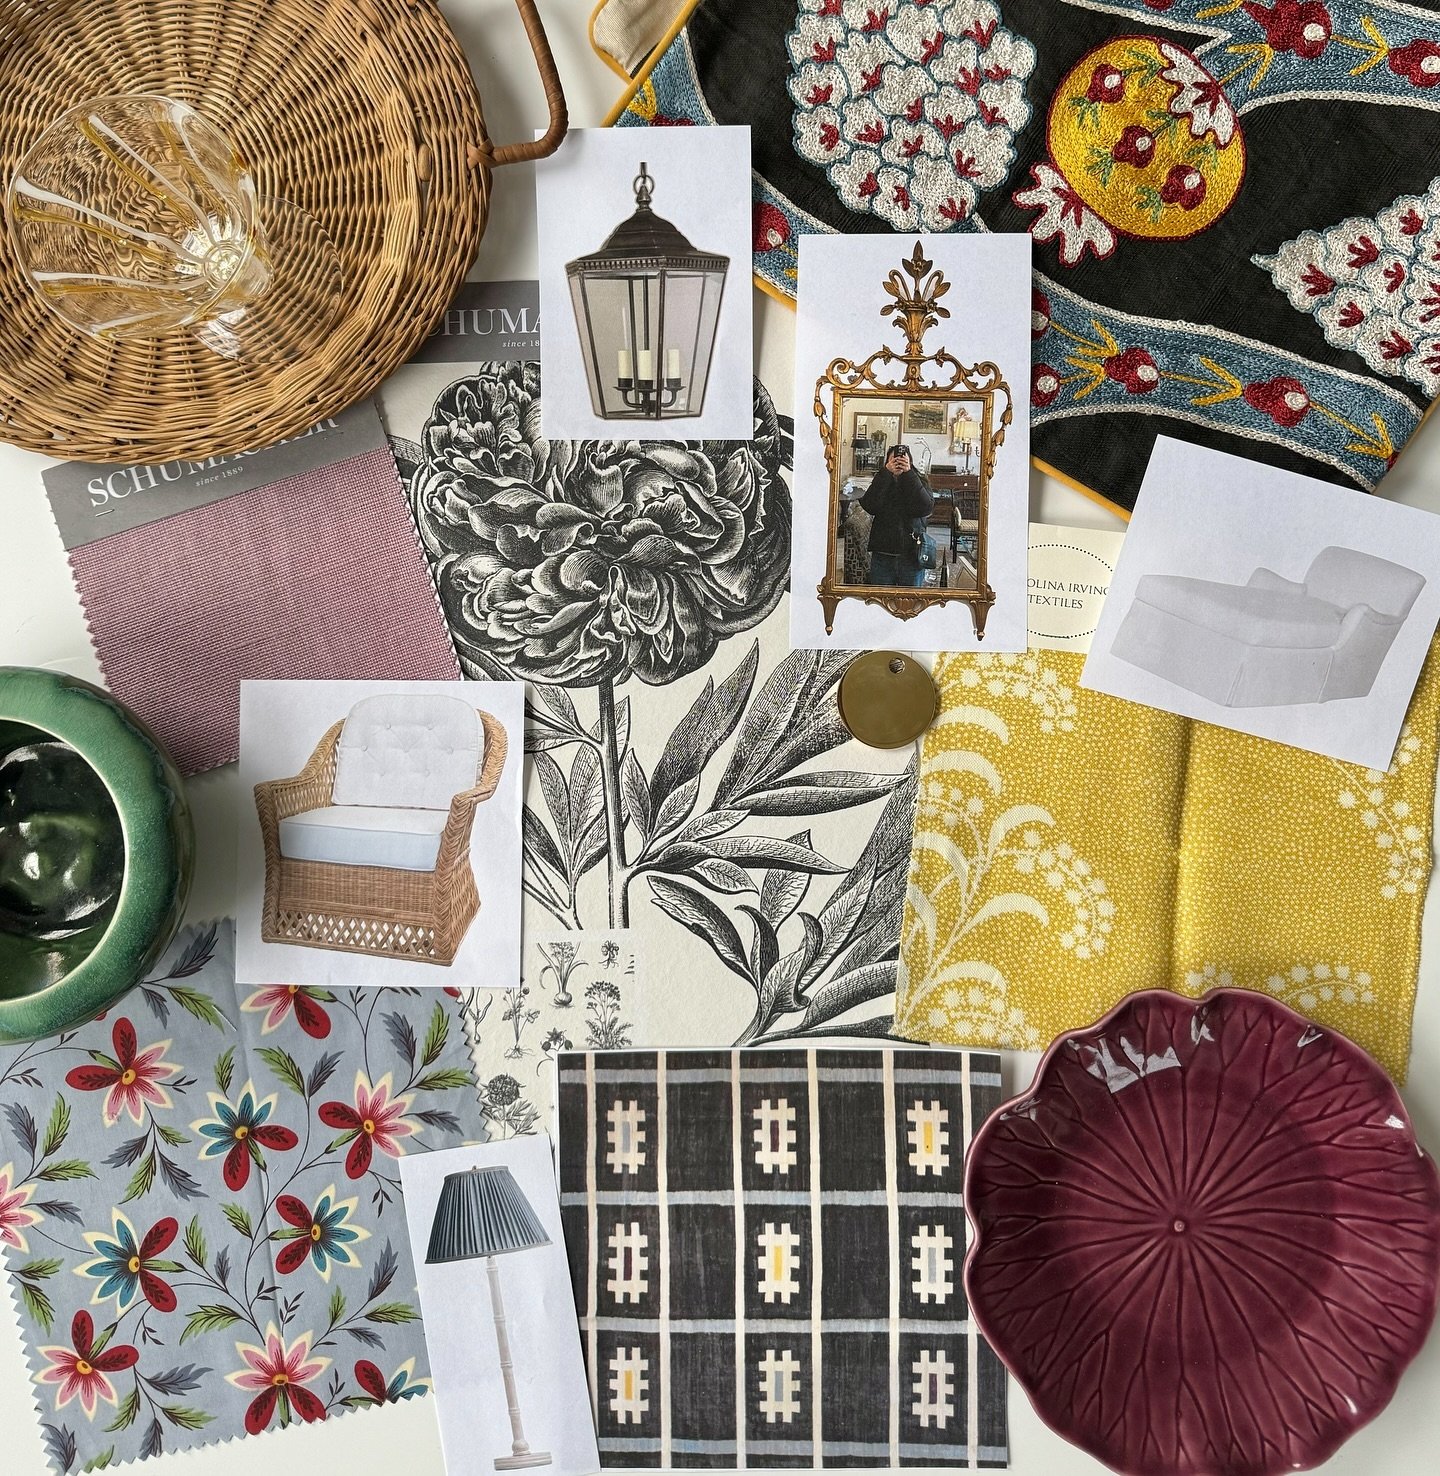 It&rsquo;s T-7 until install day for @hwdesignonadime! I&rsquo;m excited to share the mood board for my vignette, which started with this modern botanical wallpaper generously donated by @schumacher1889. The Scandinavian flat weave rug from @landryan